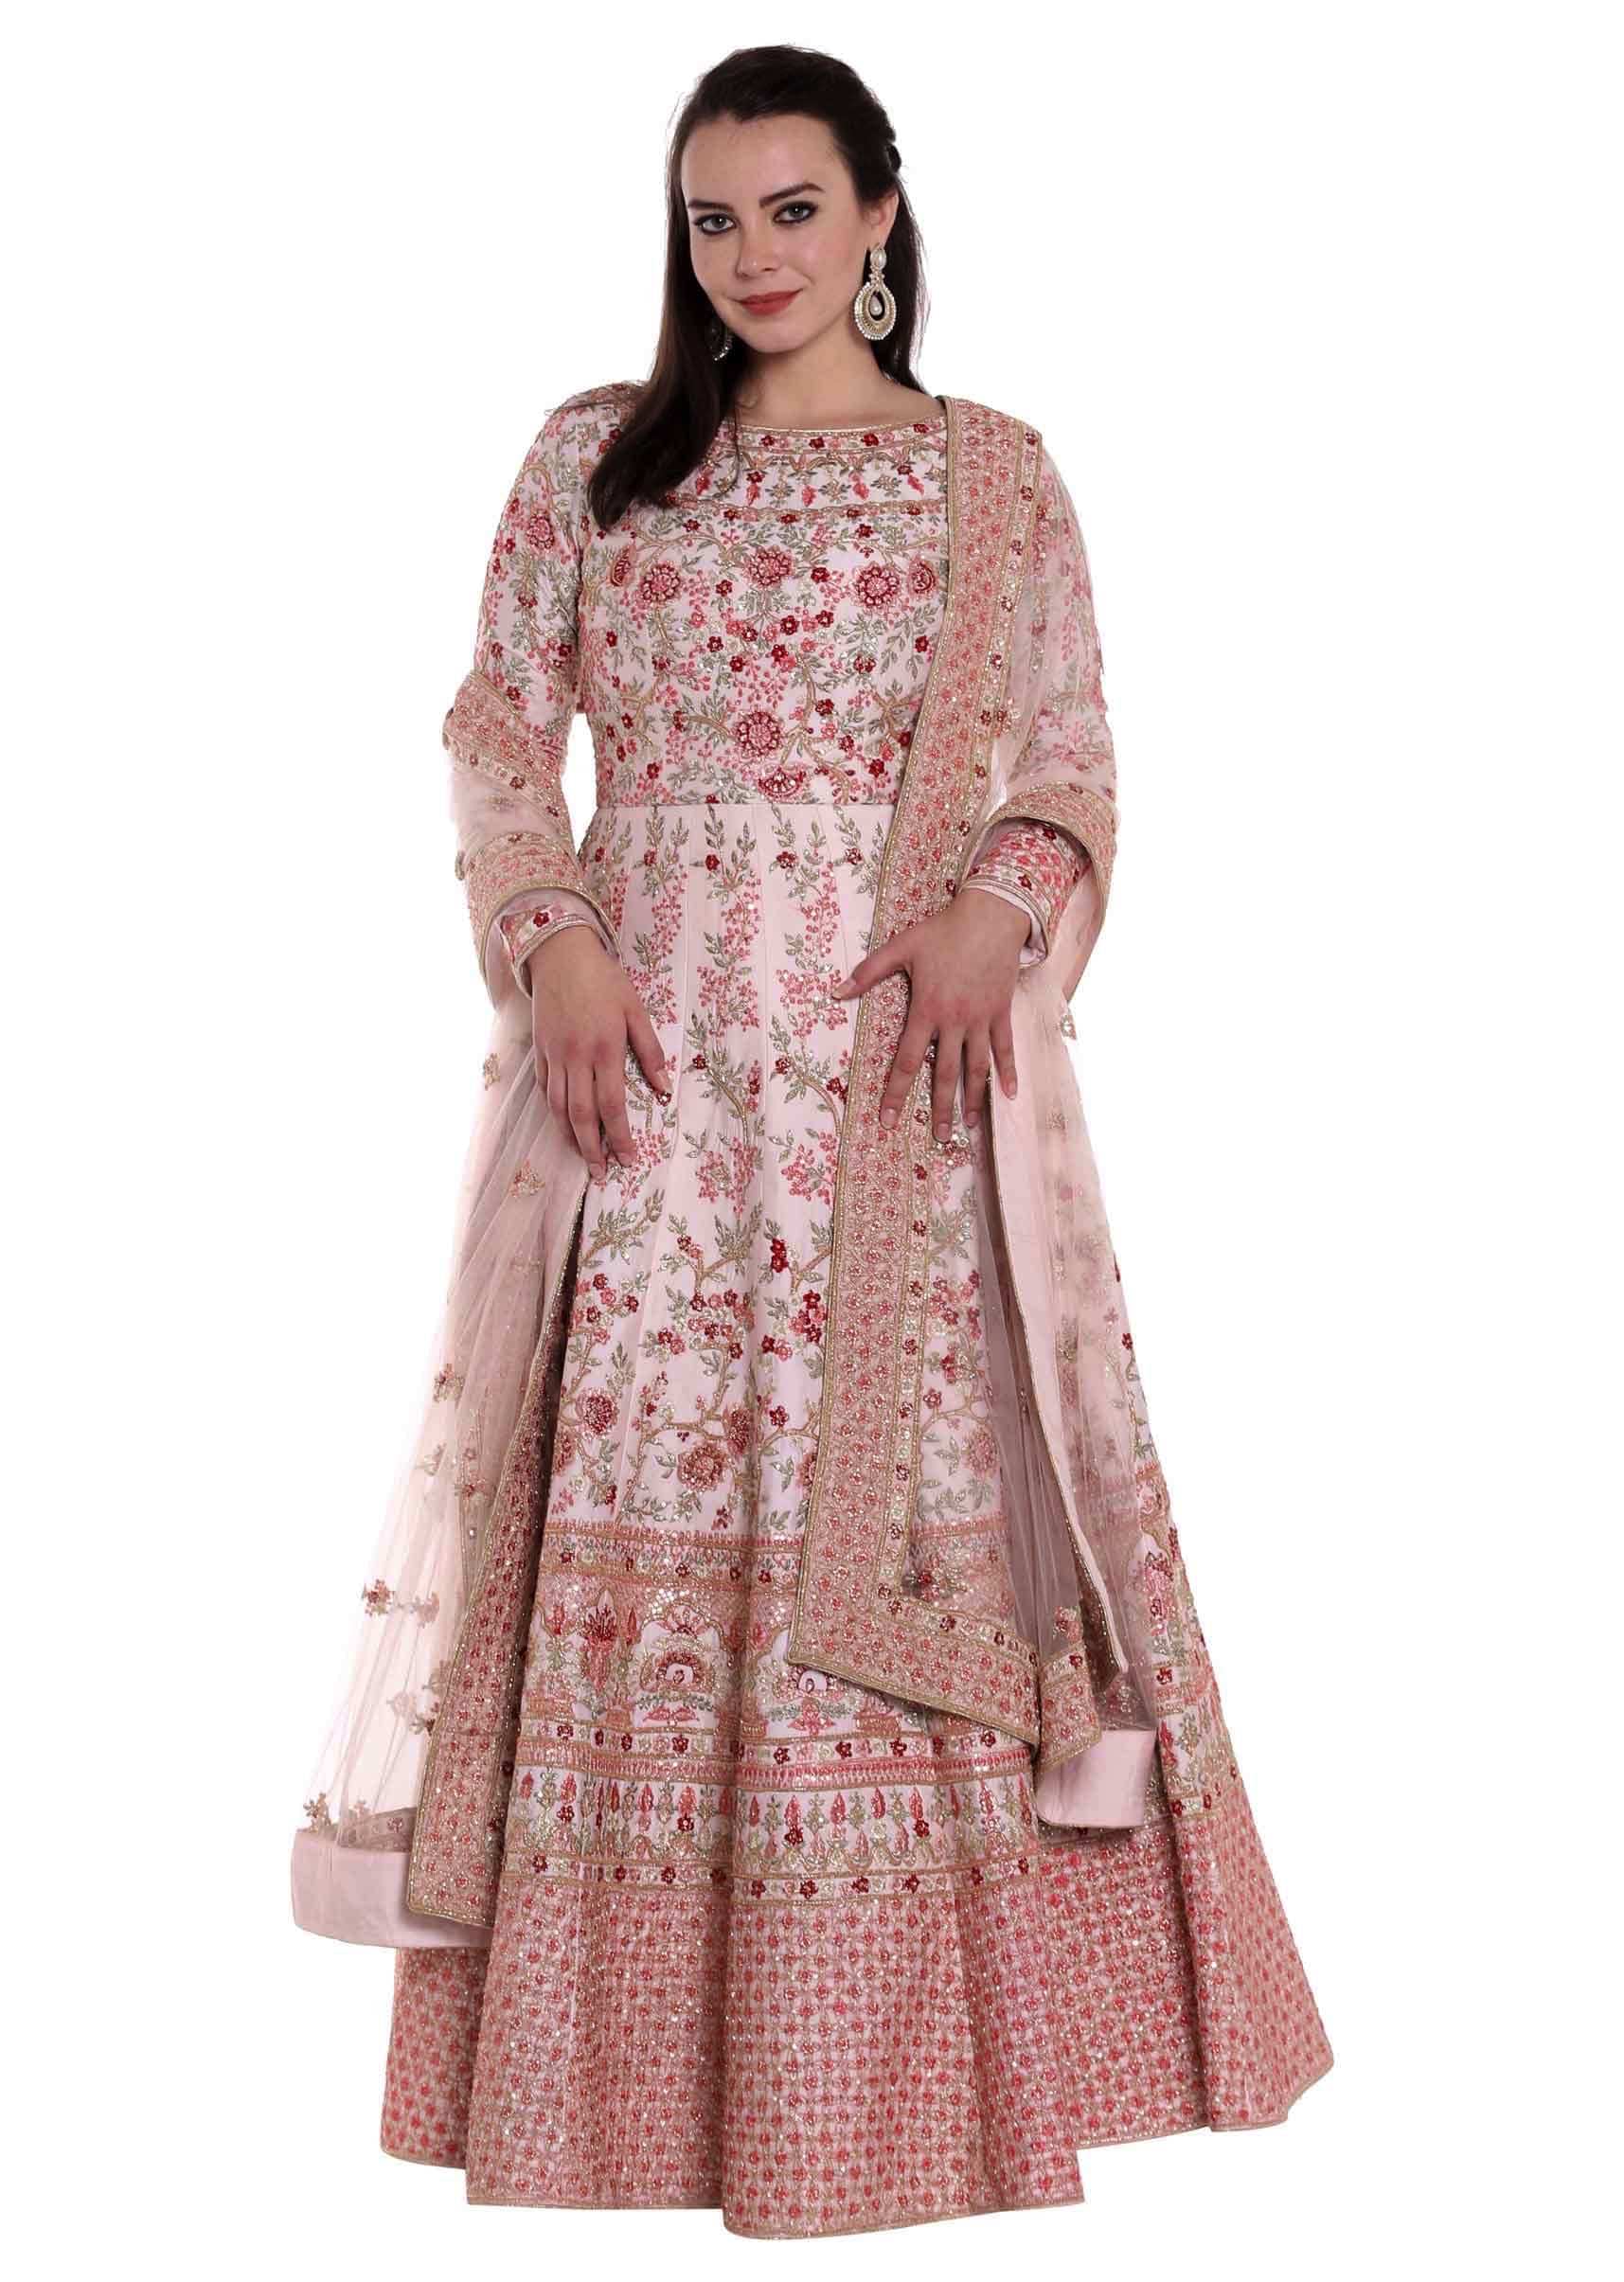 Vanilla cream anarkali suit in adorn in resham and zari in floral jaal all over only on Kalki